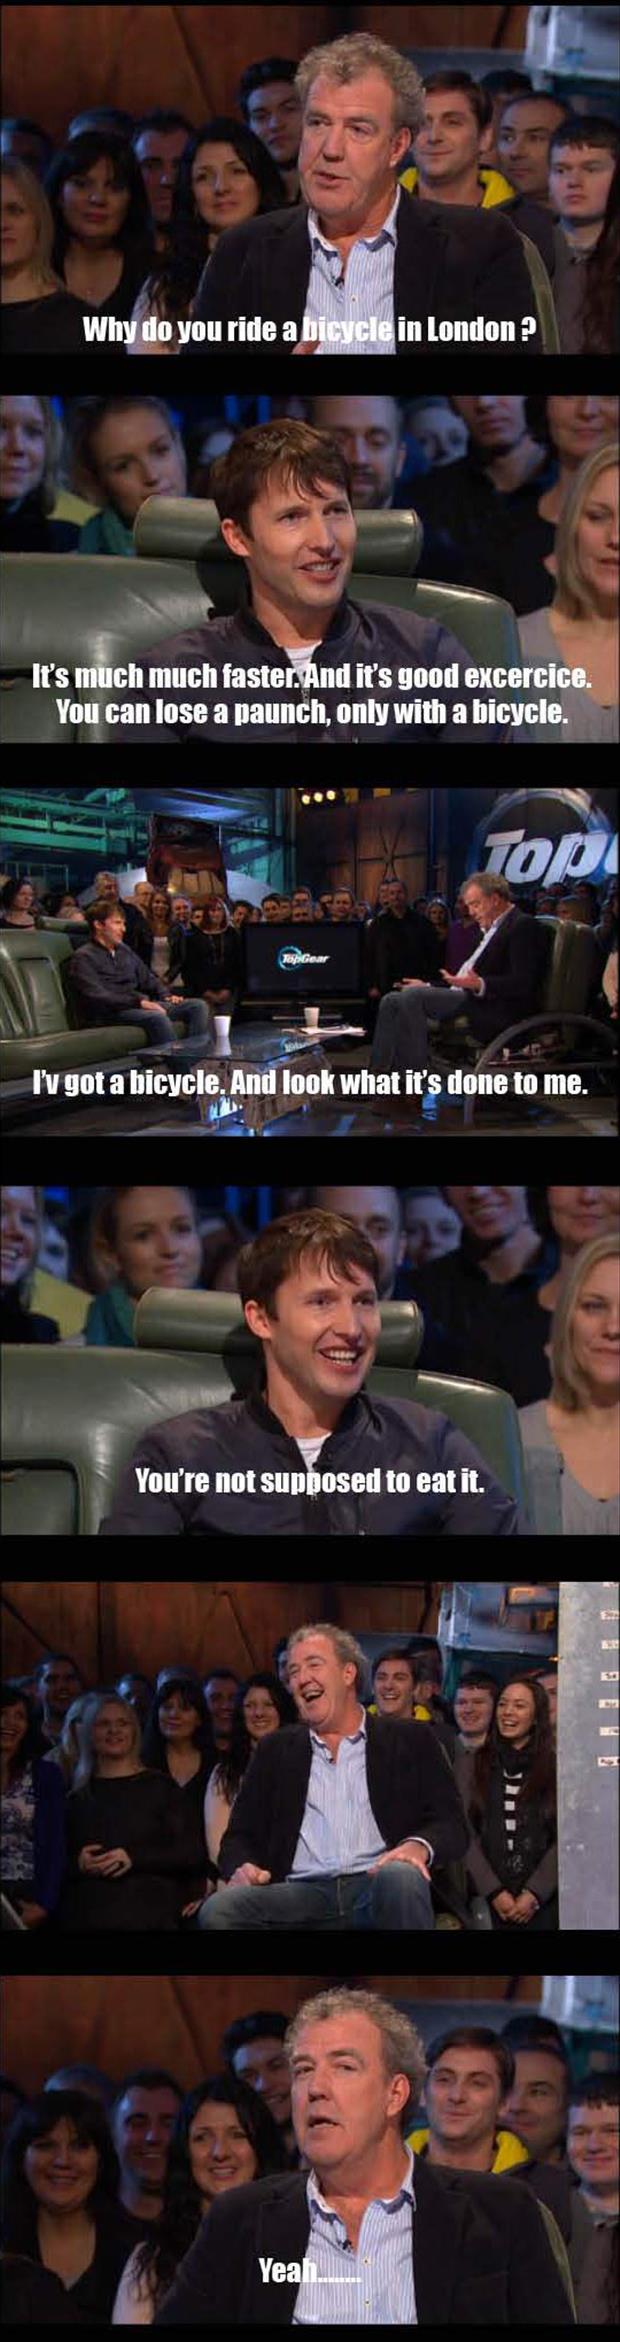 Why do you ride a bicycle in London?